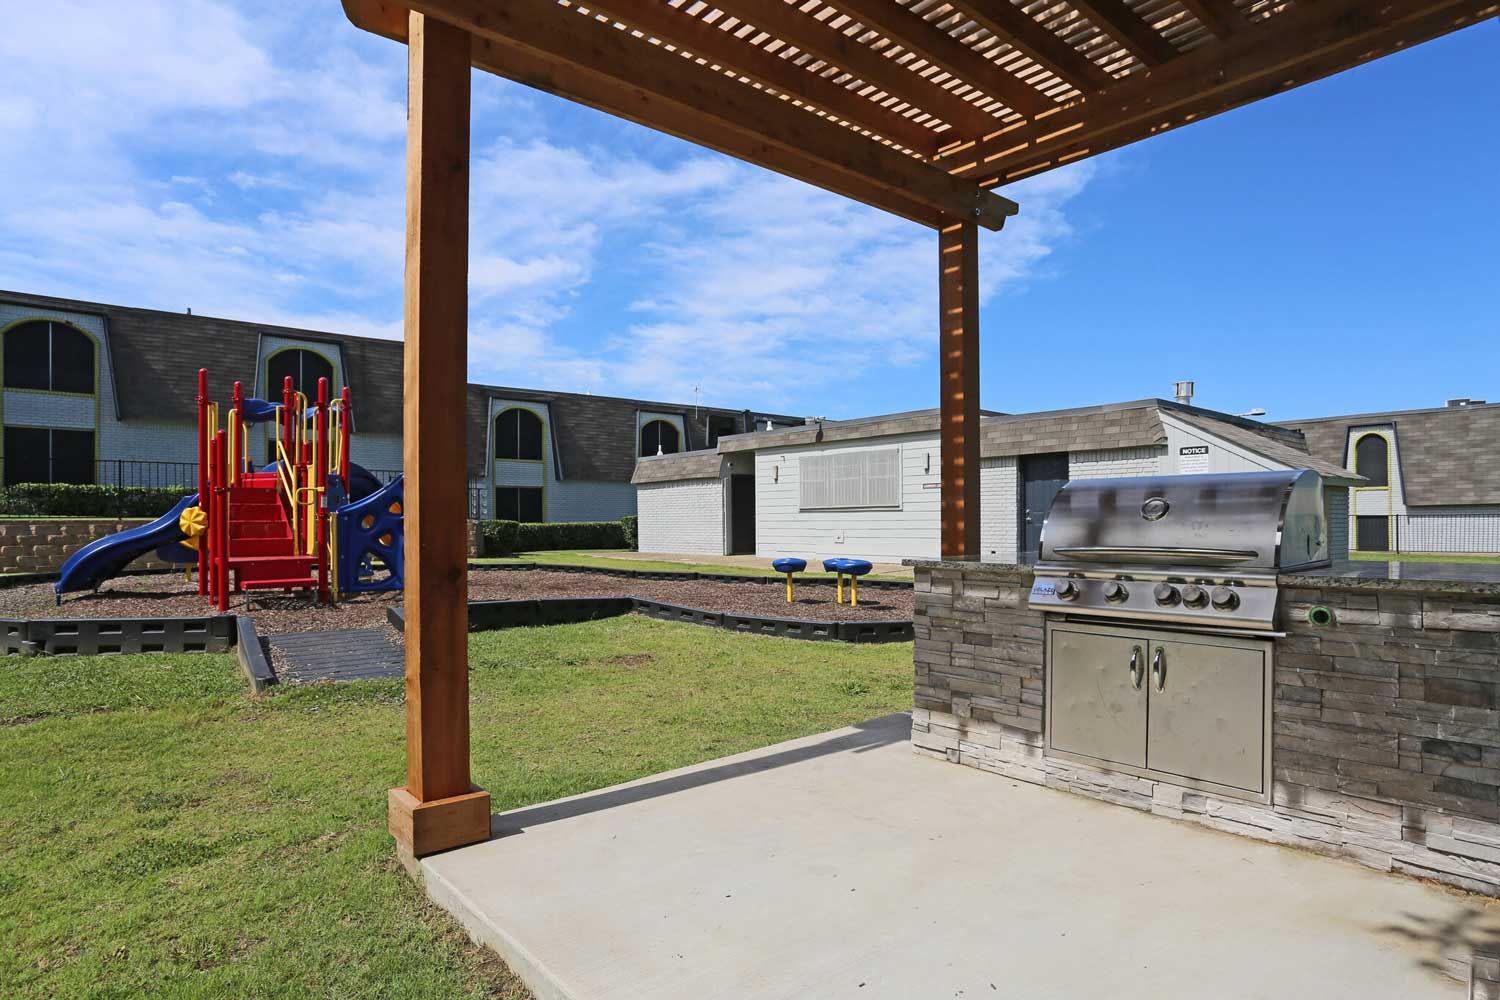 Outdoor Grill and Playground Area at The Junction Apartments in Arlington, TX